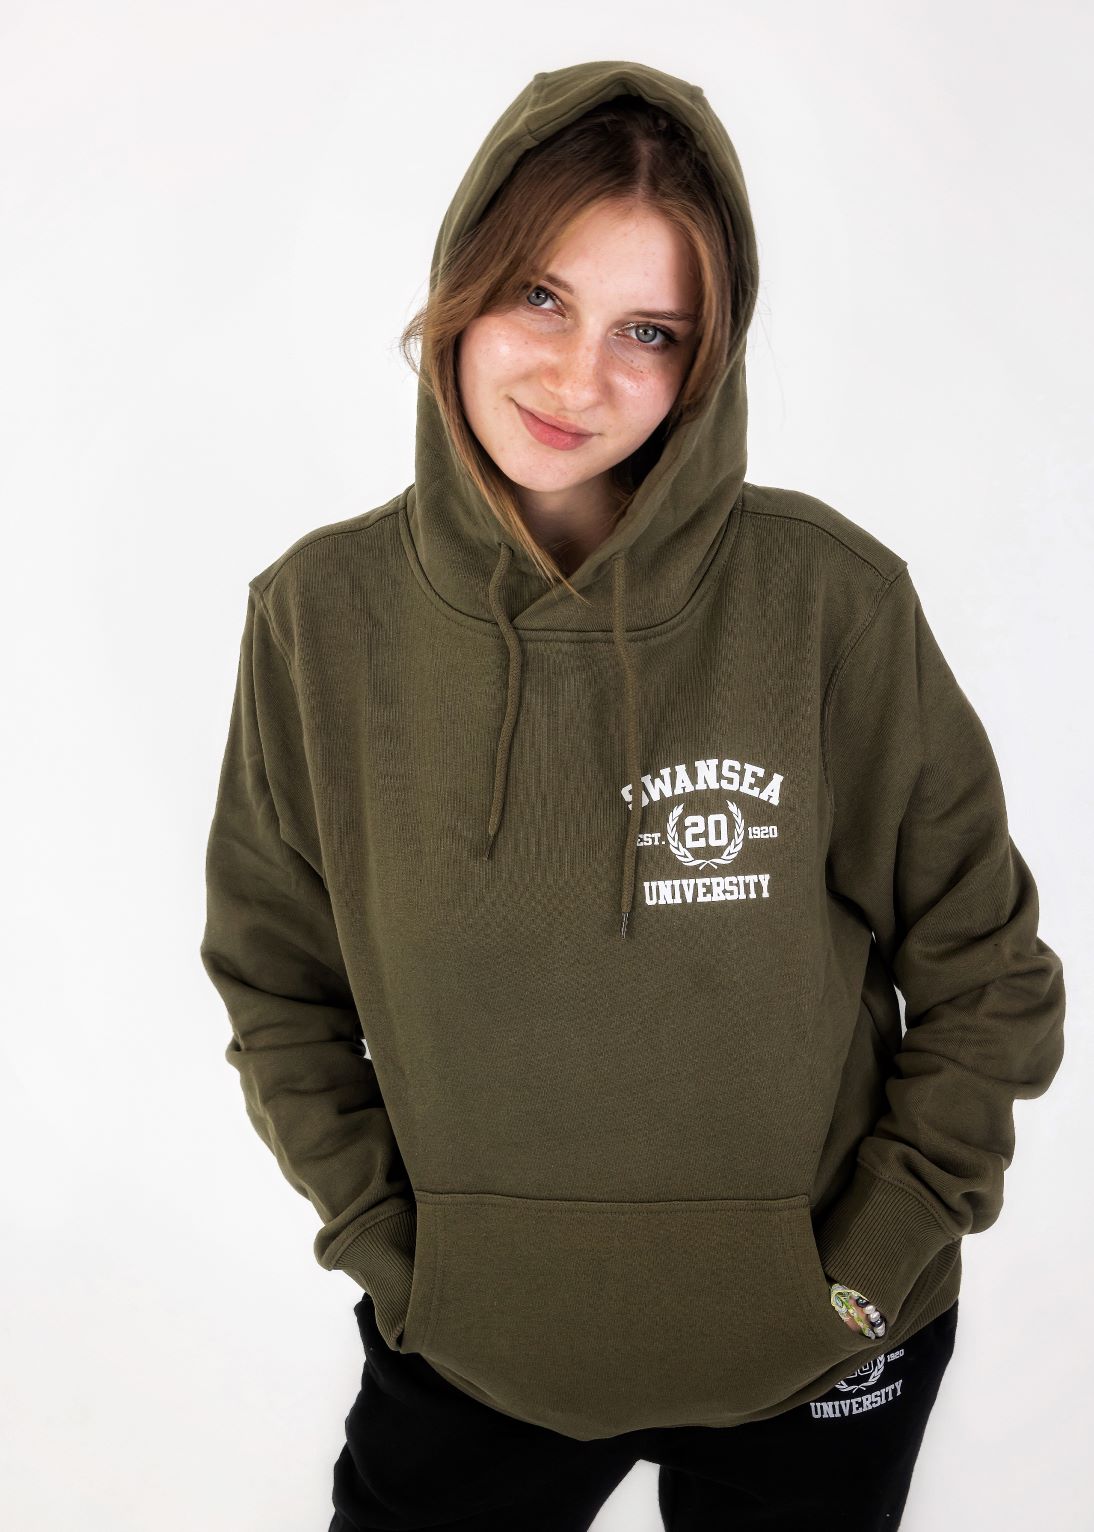 Official Swansea University Hoodies – Fulton Outfitters